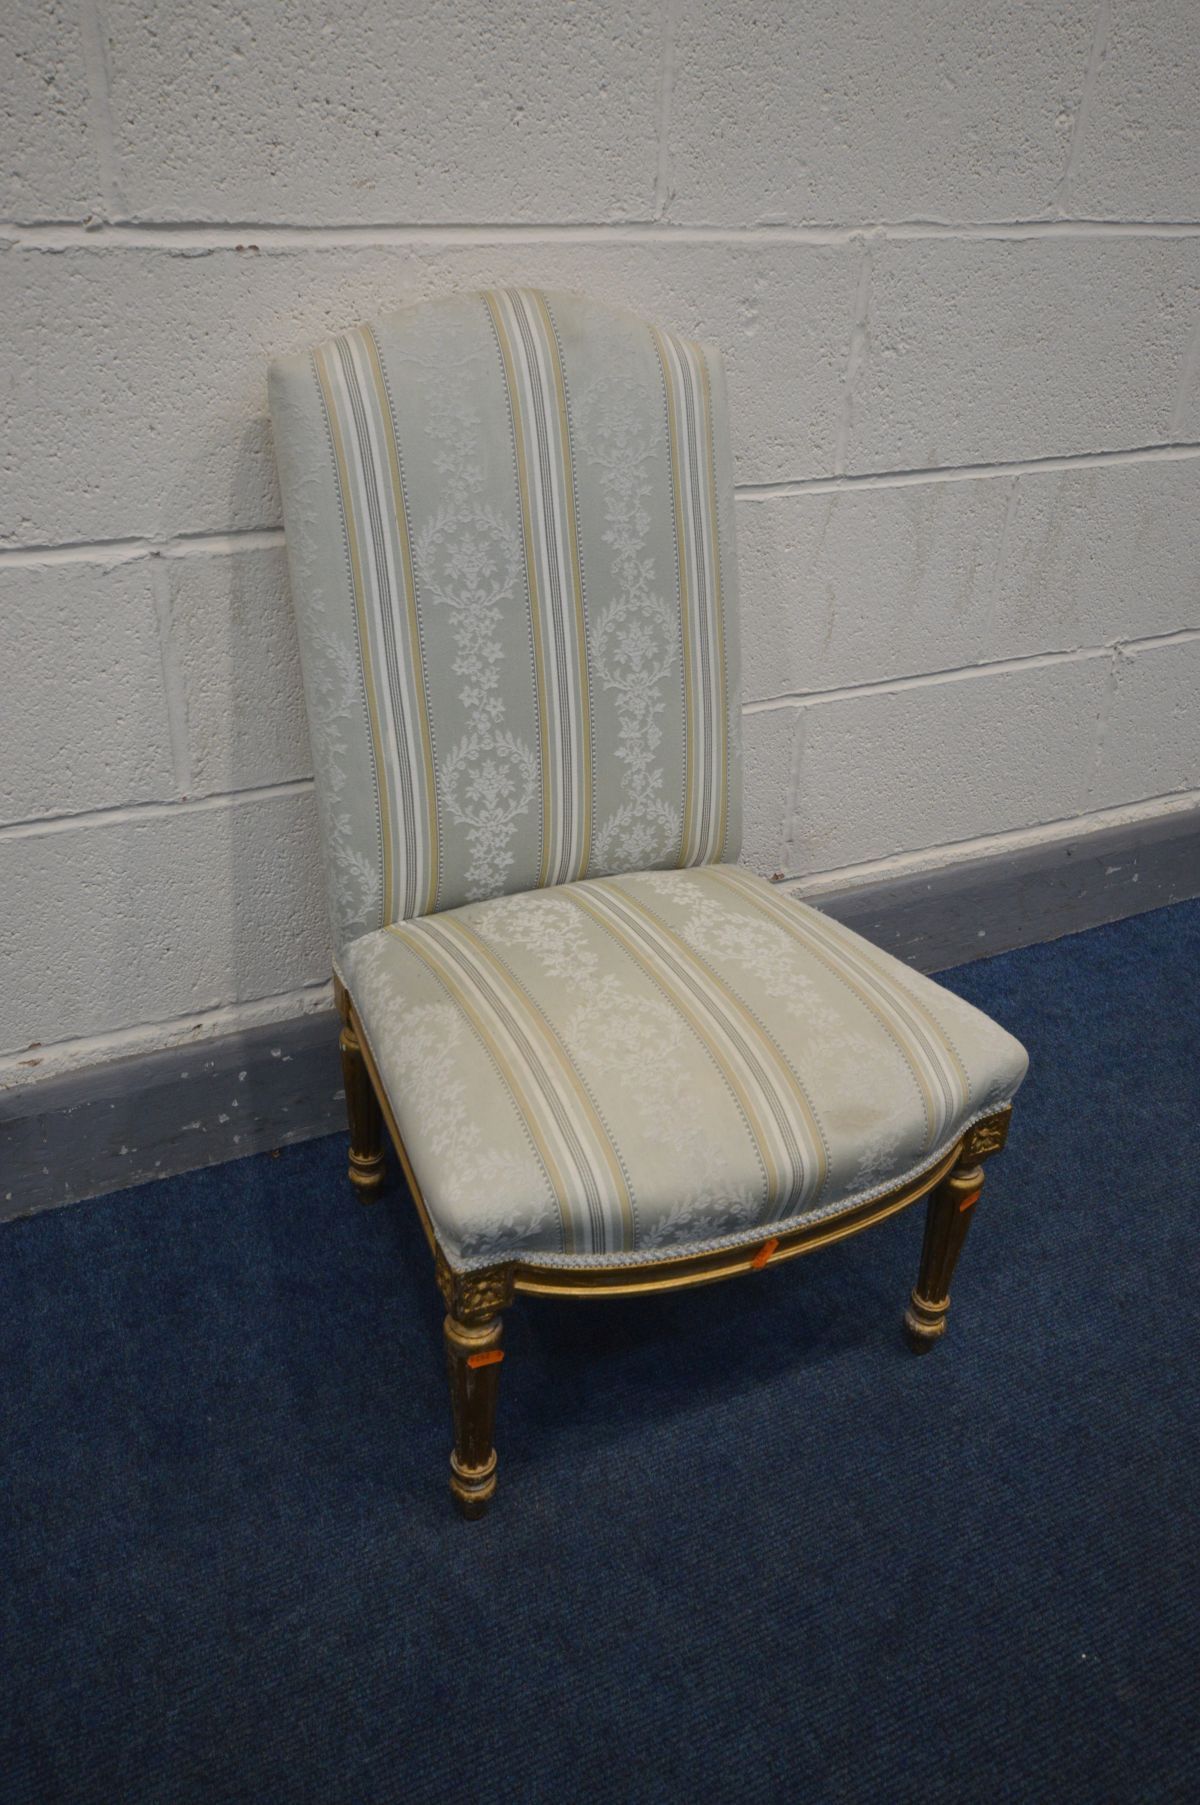 A 20TH CENTURY LOUIS XVI STYLE GILTWOOD BEDROOM CHAIR, on redded tapered legs, width 49cm x depth